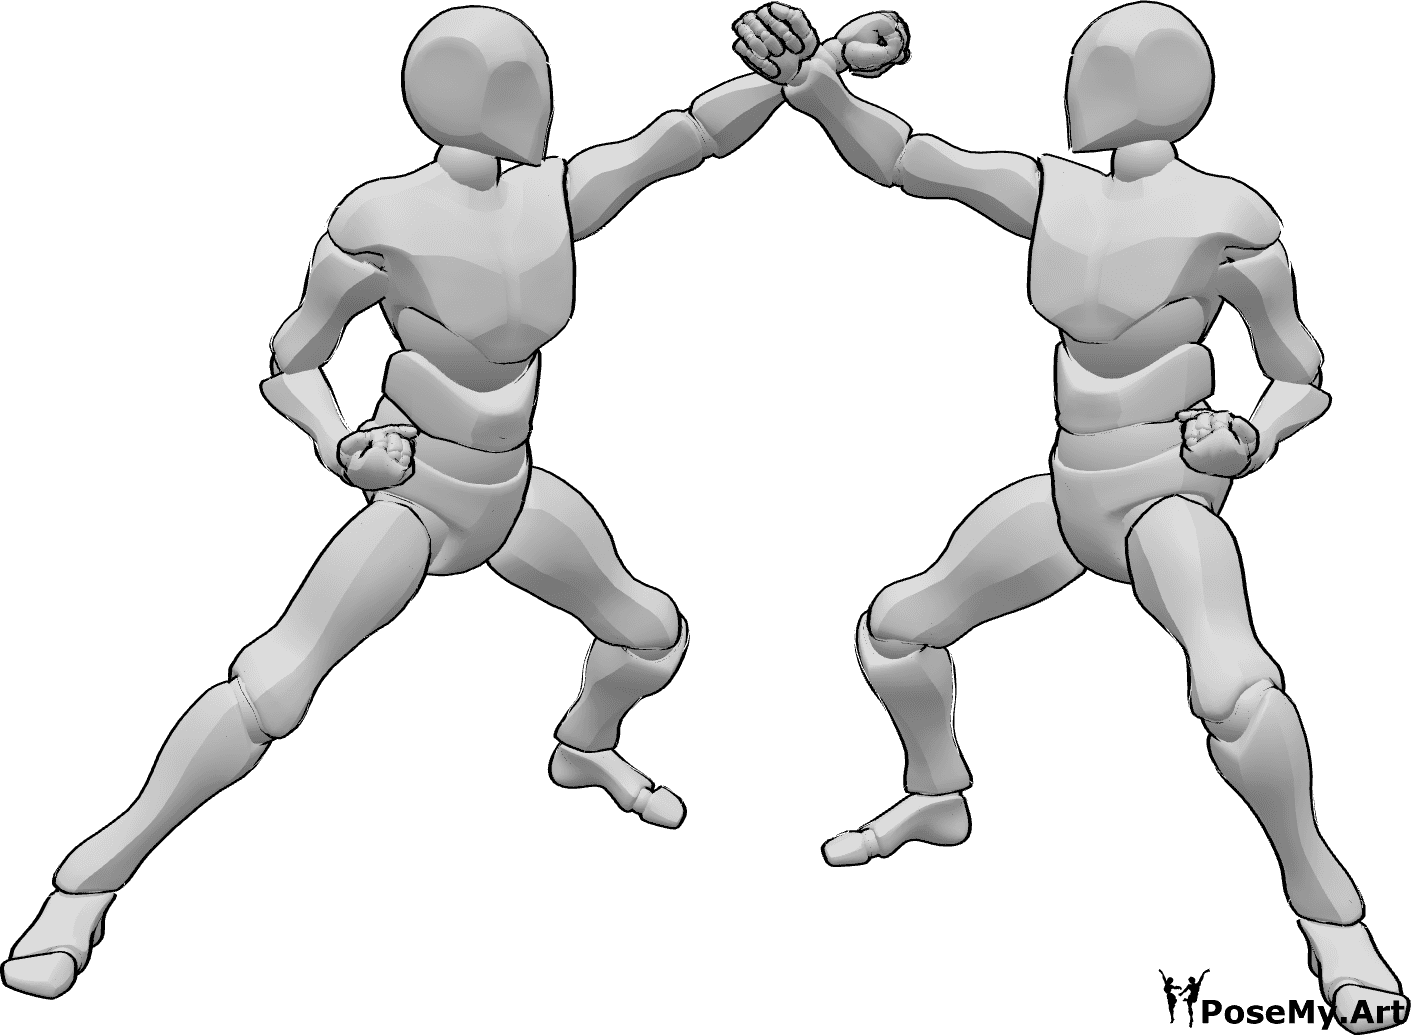 Pose Reference- Two males karate pose - Two males are fighting karate pose